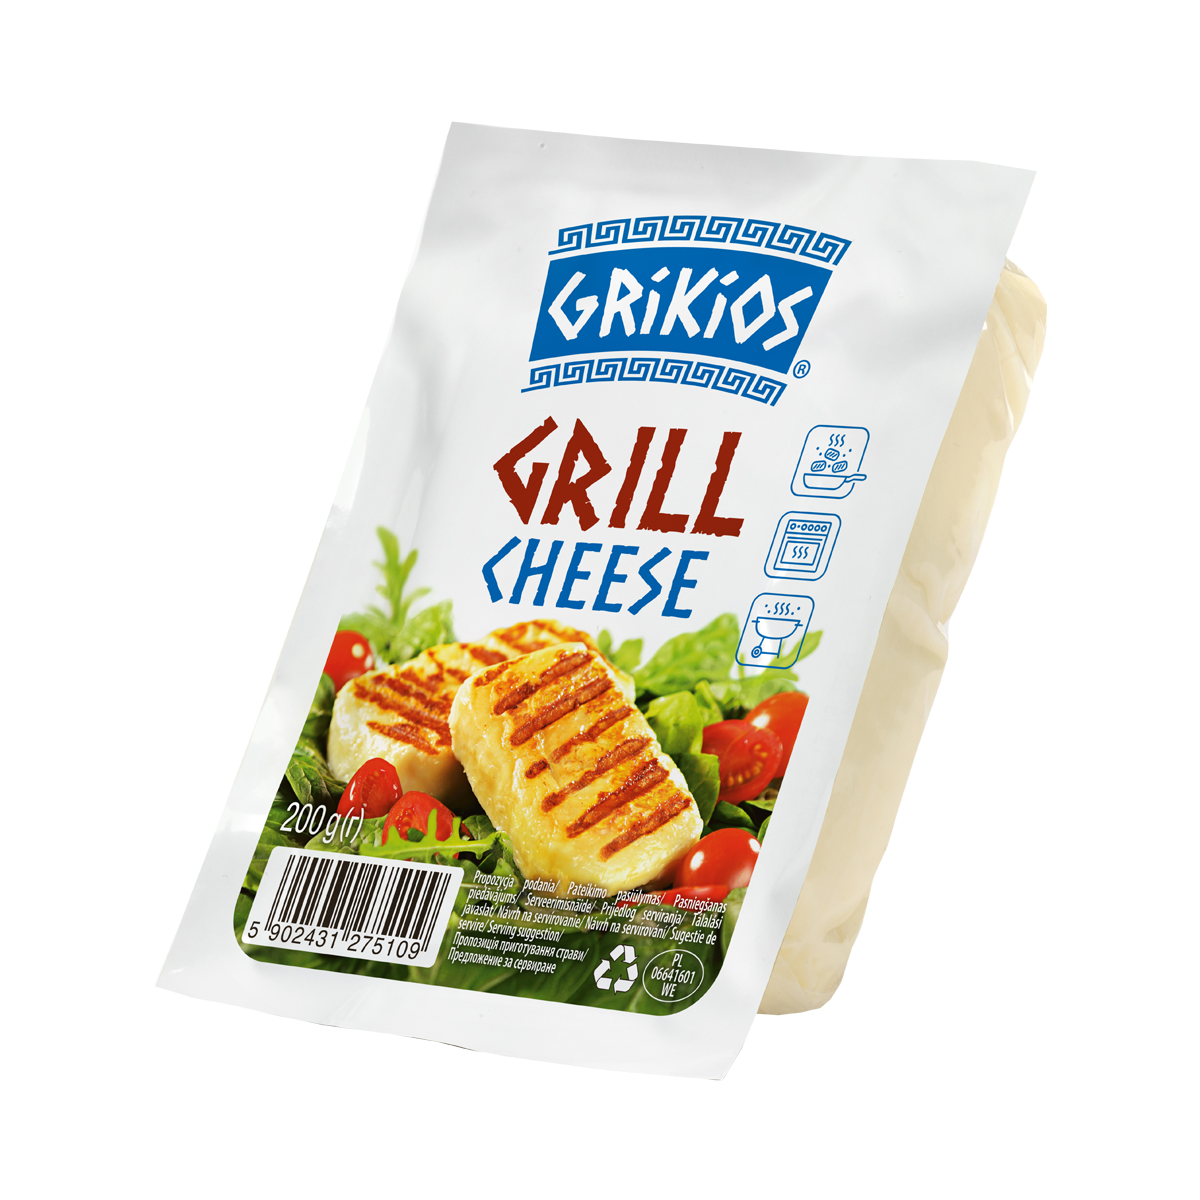 Grikios grill cheese